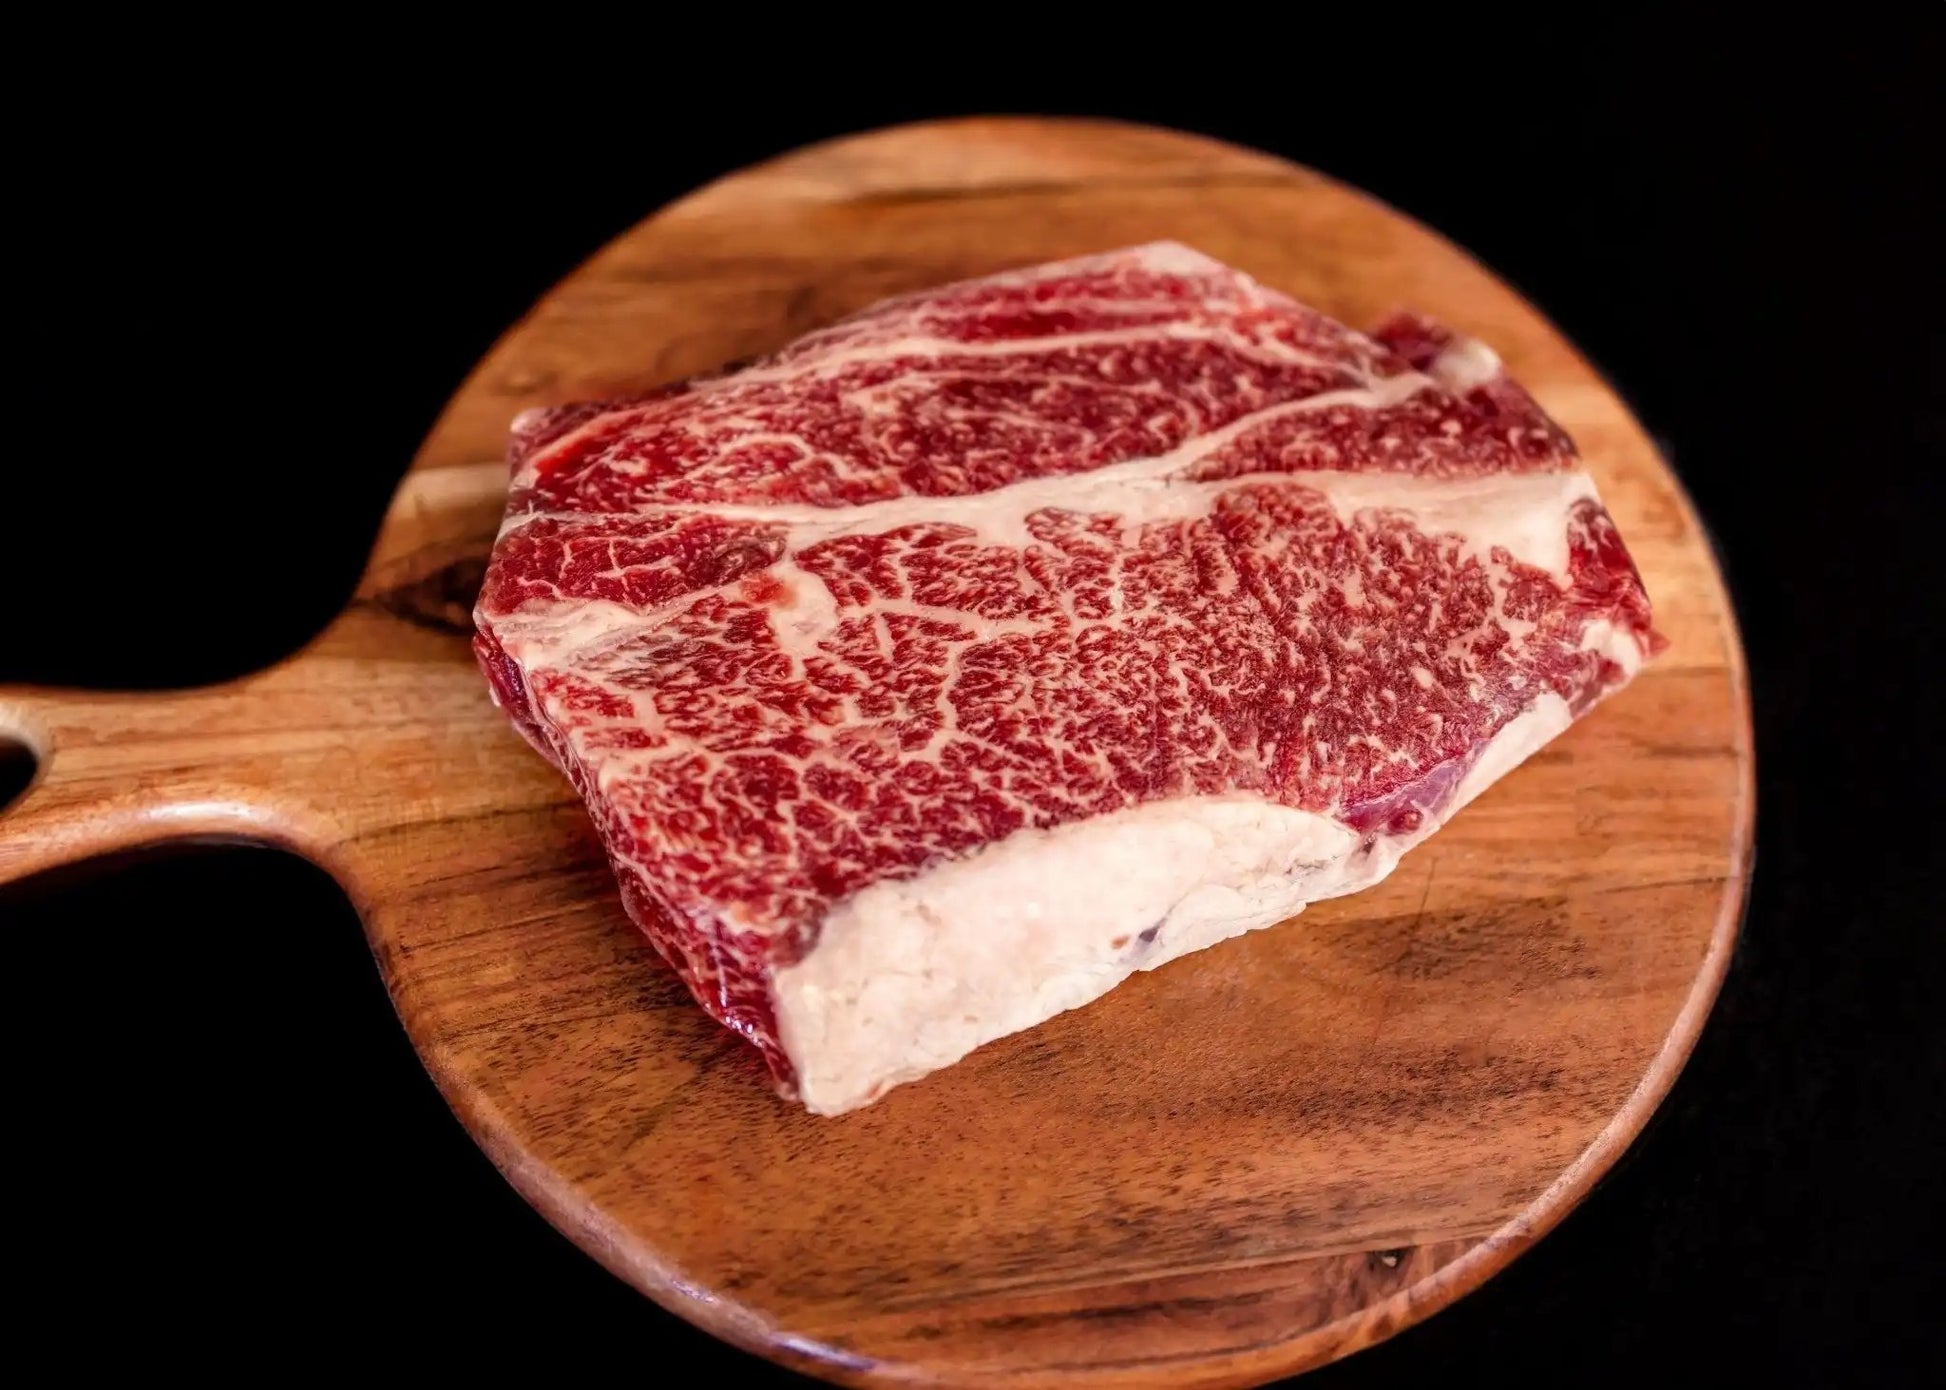 Rancher's Reserve Grass-Fed Wagyu or Angus Beef Box - Artisan Meat Club - The Hufeisen-Ranch (WYO Wagyu)